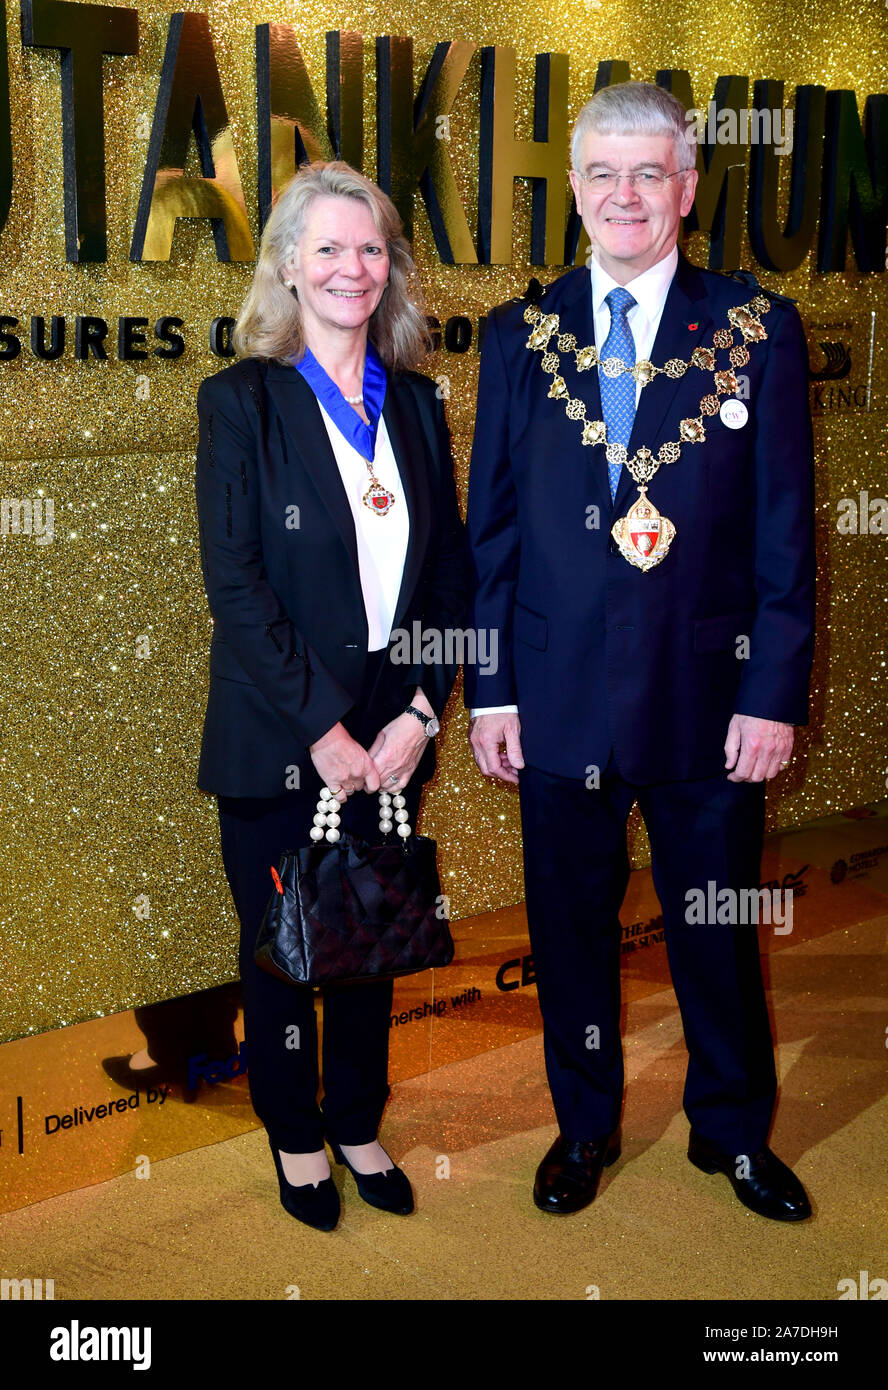 The Mayor of Kensington and Chelsea Will Pascall (right) and Sarah Addenbrooke during the Tutankhamun Treasures Of The Golden Pharaoh Opening Gala at the Saatchi Gallery, London. Stock Photo